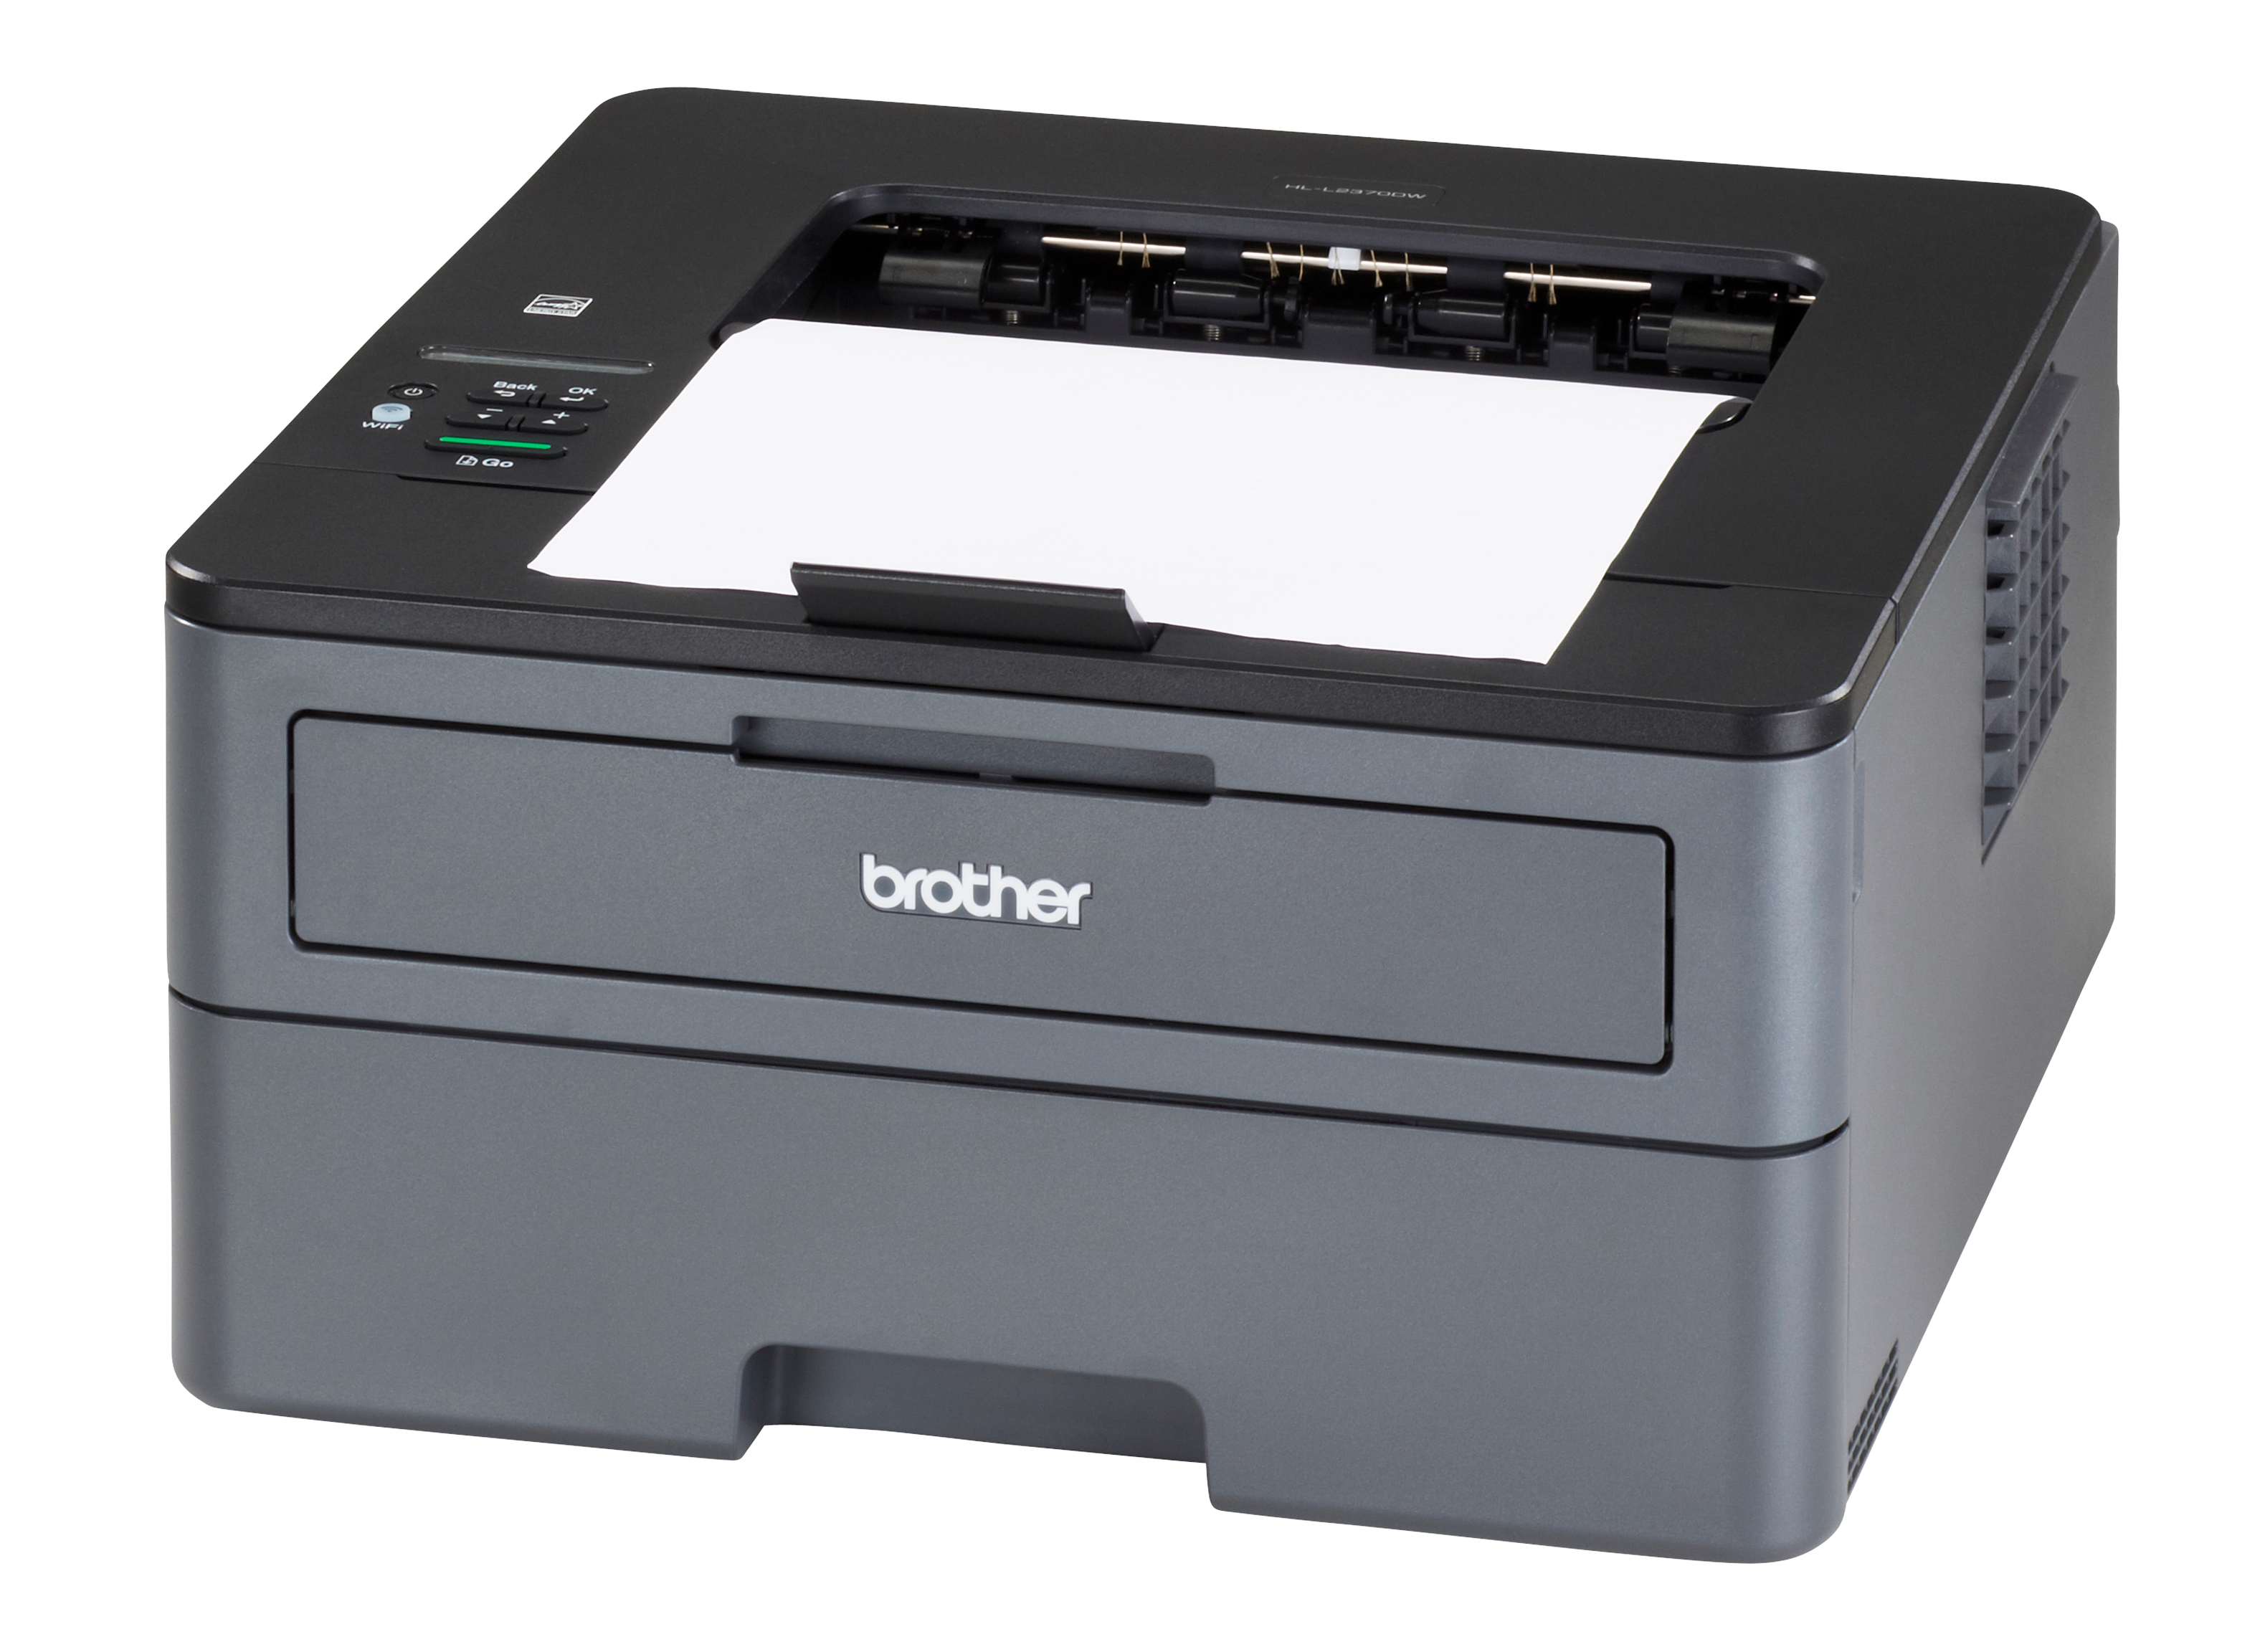 Brother XL Printer Review Reports